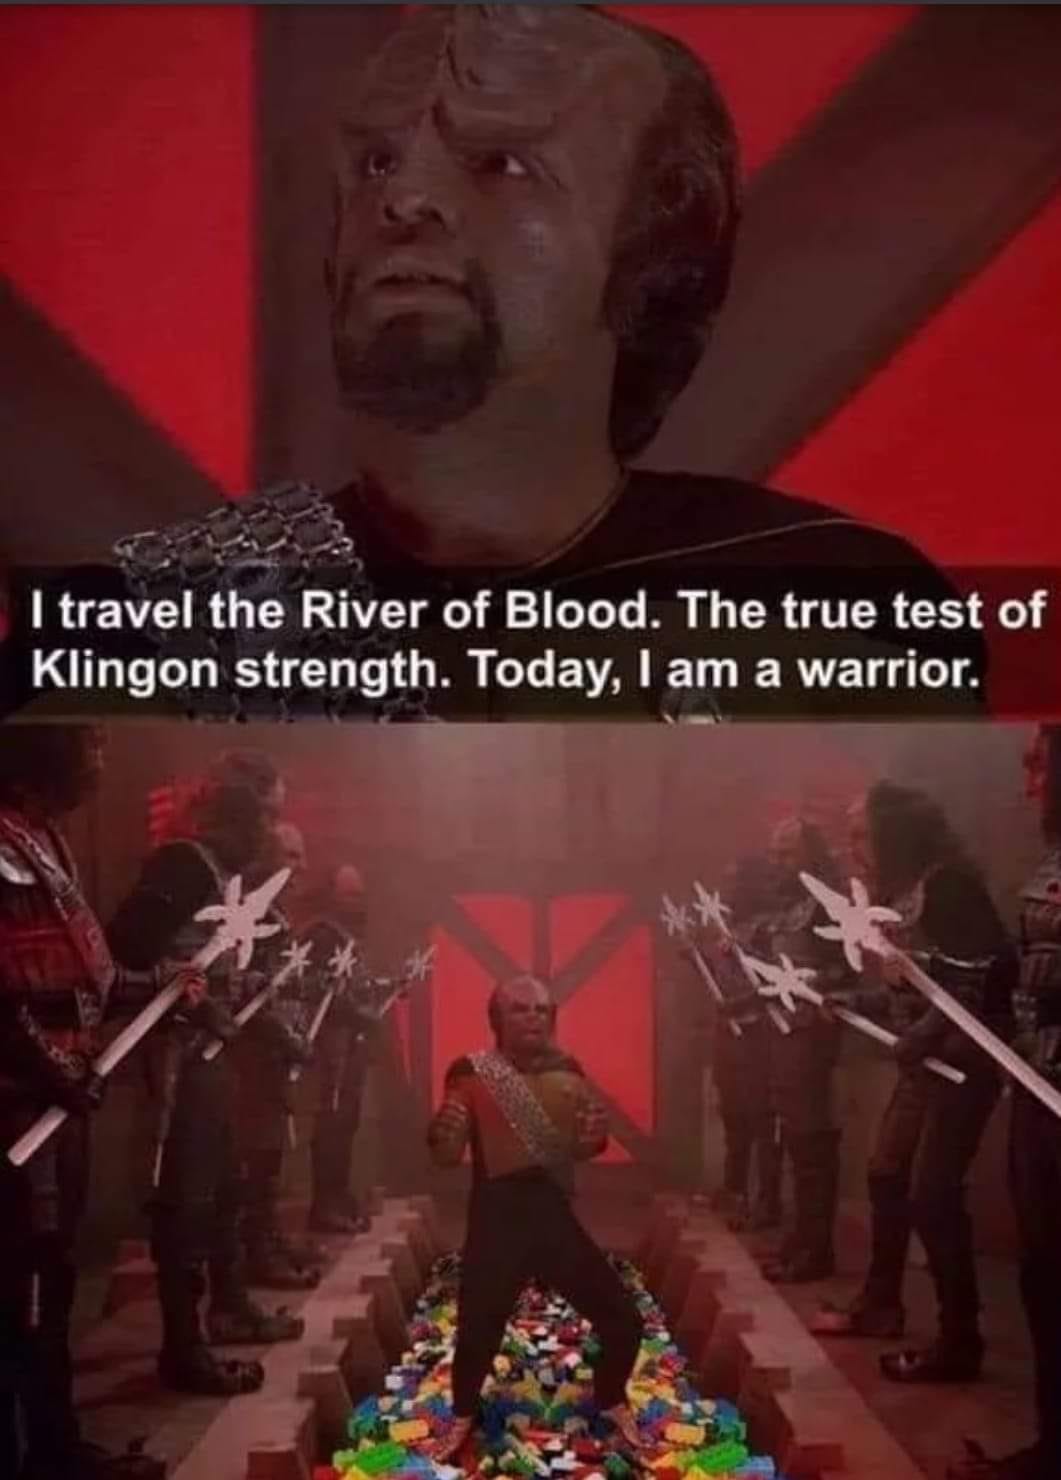 i travel the river of blood, the true test of klingon strength, today i am a warrior